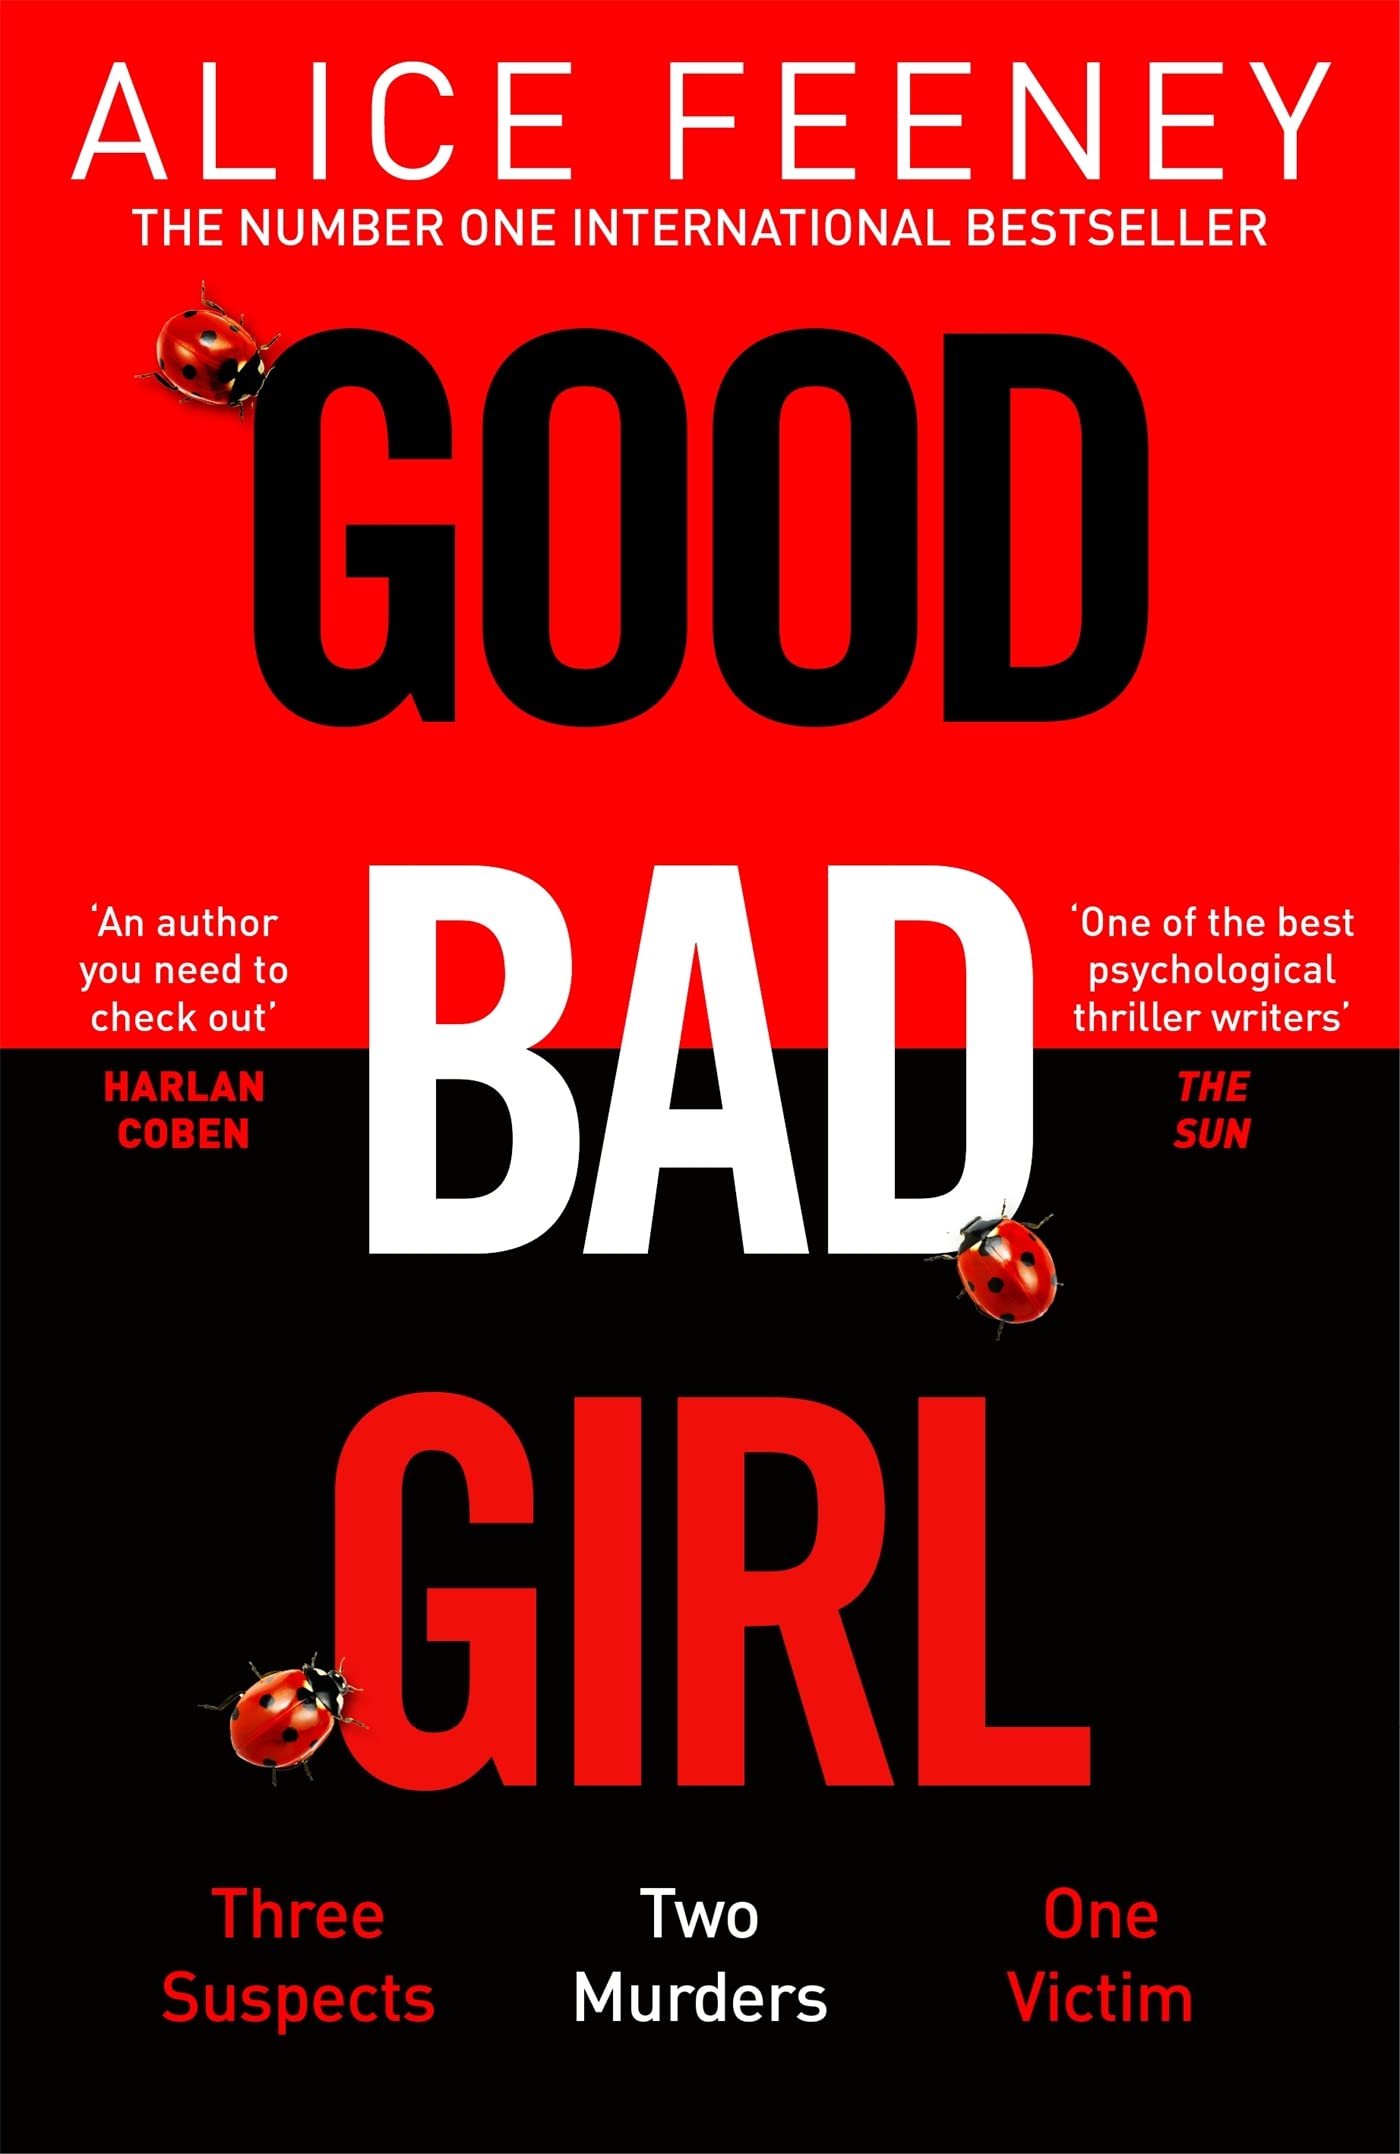 Good_bad_Girl_book_cover